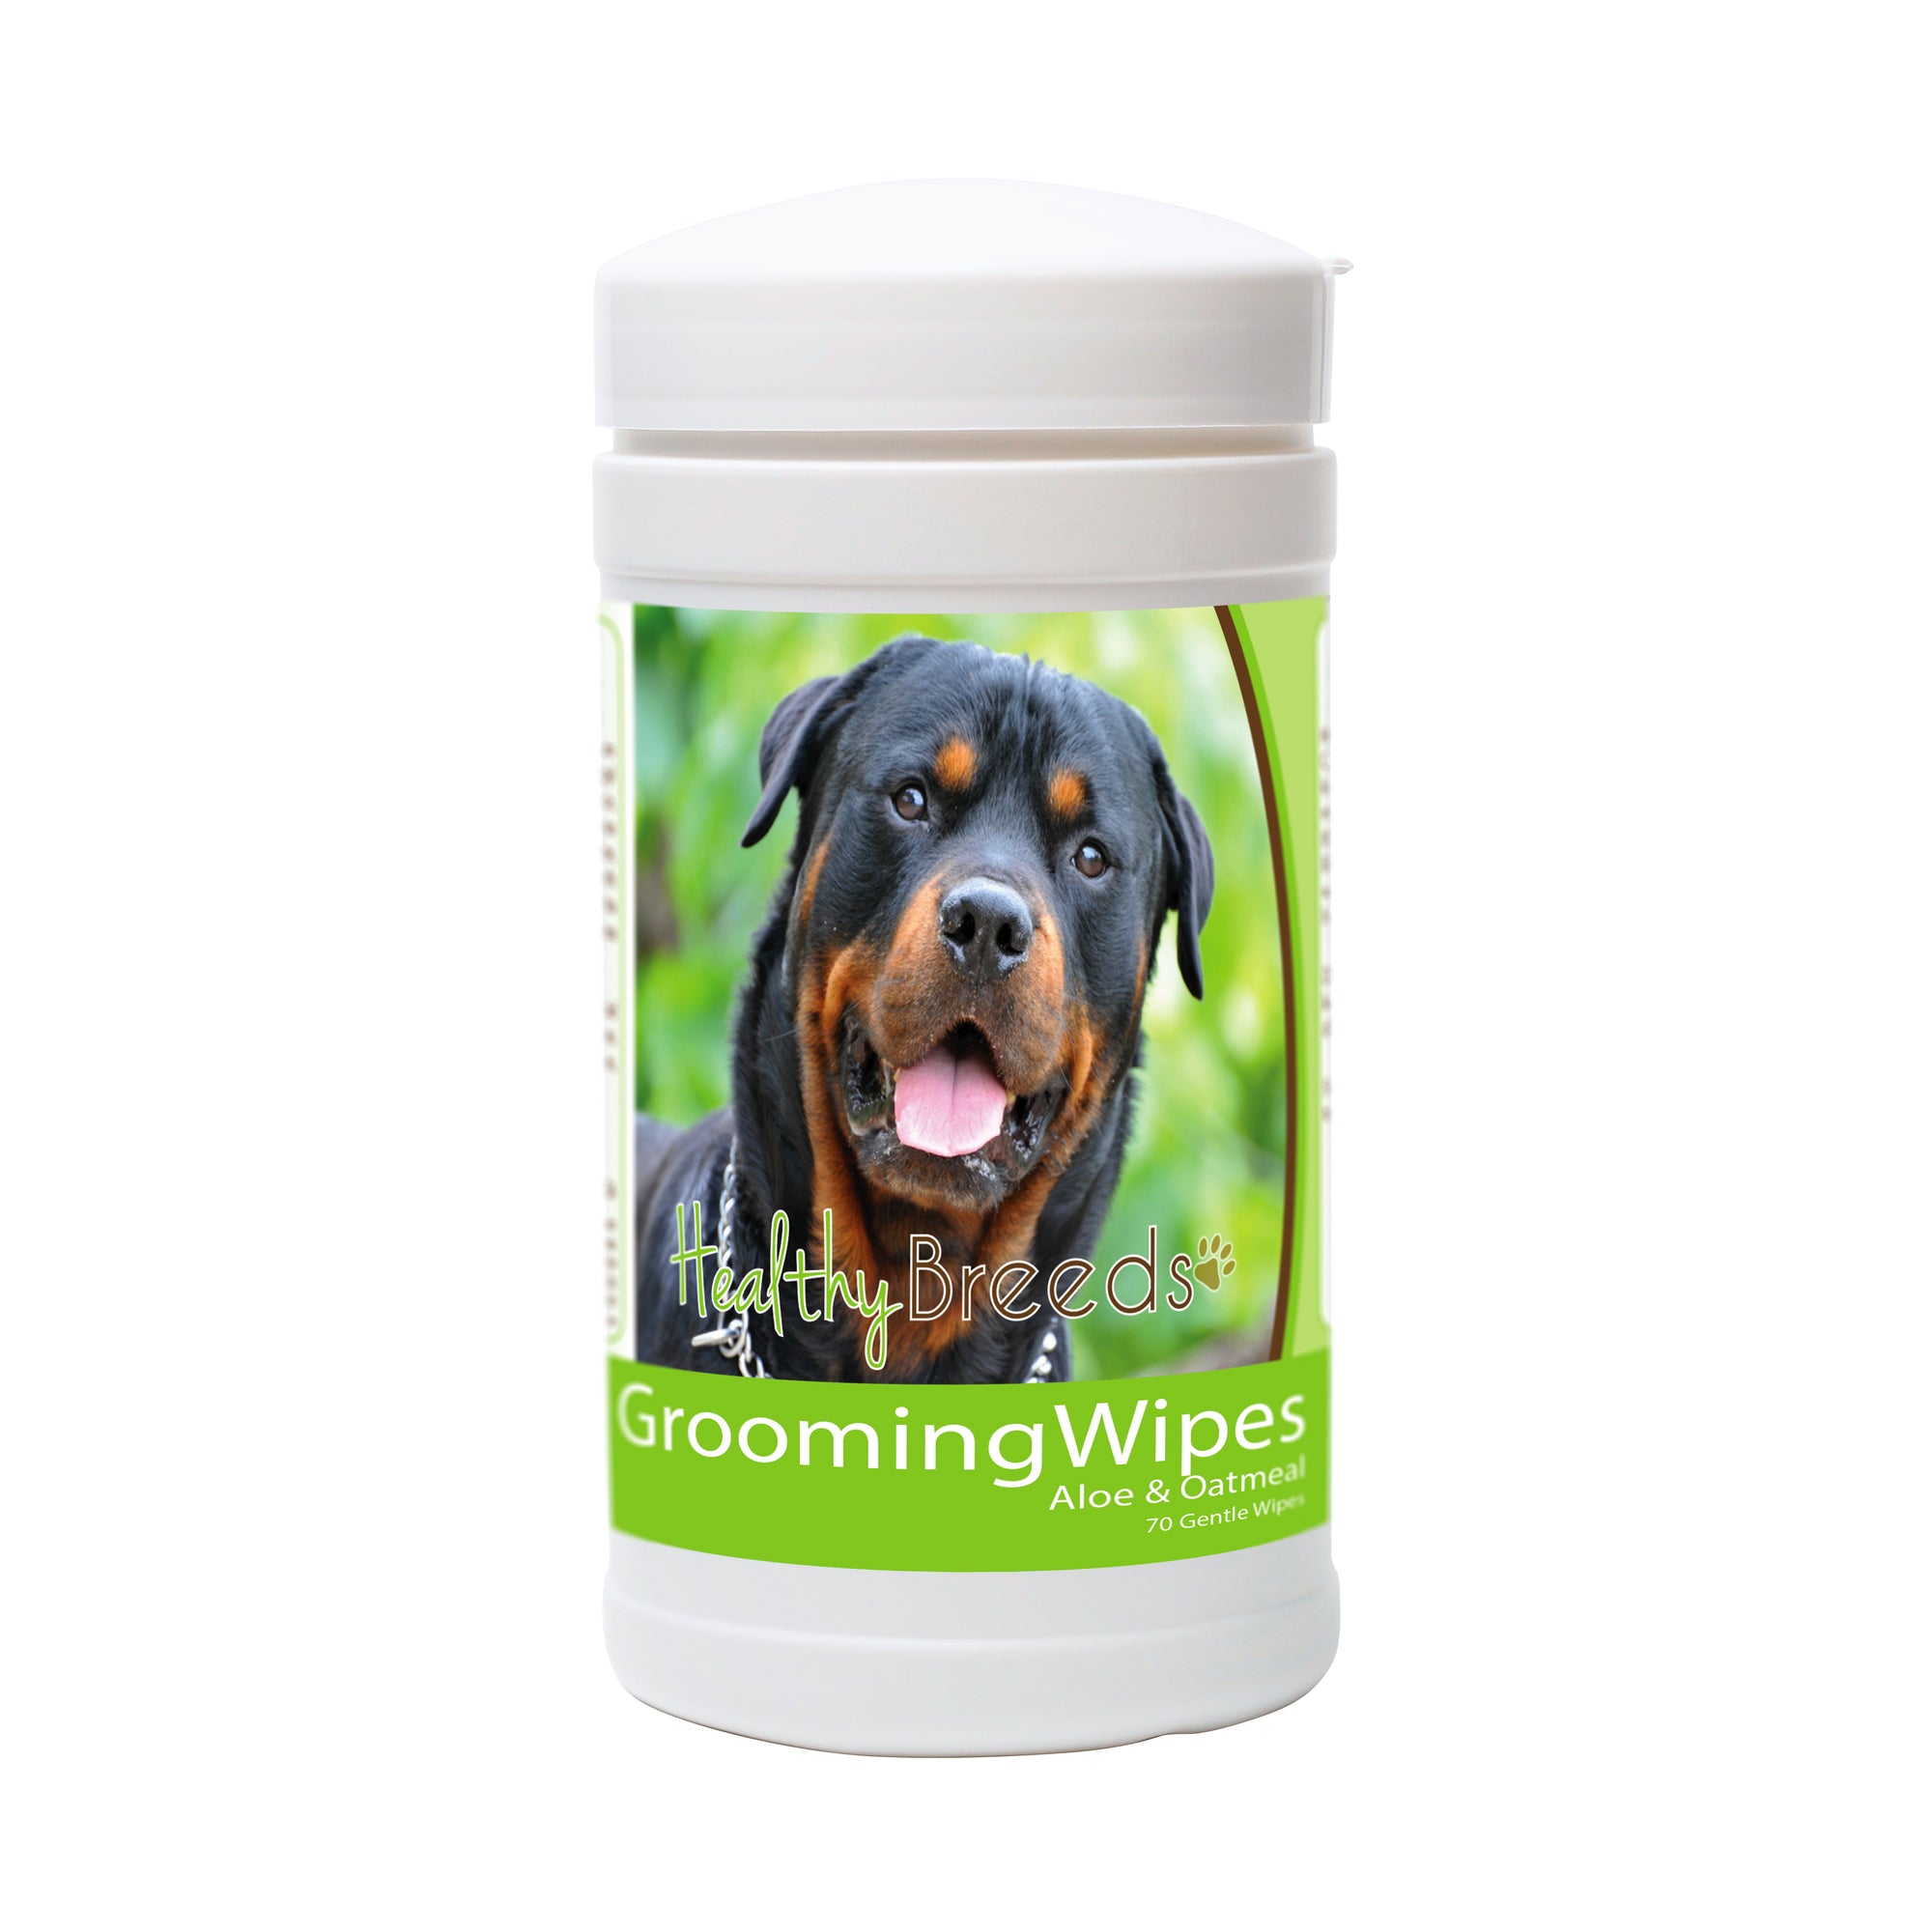 Healthy Breeds Rottweiler Grooming Wipes 70 Count